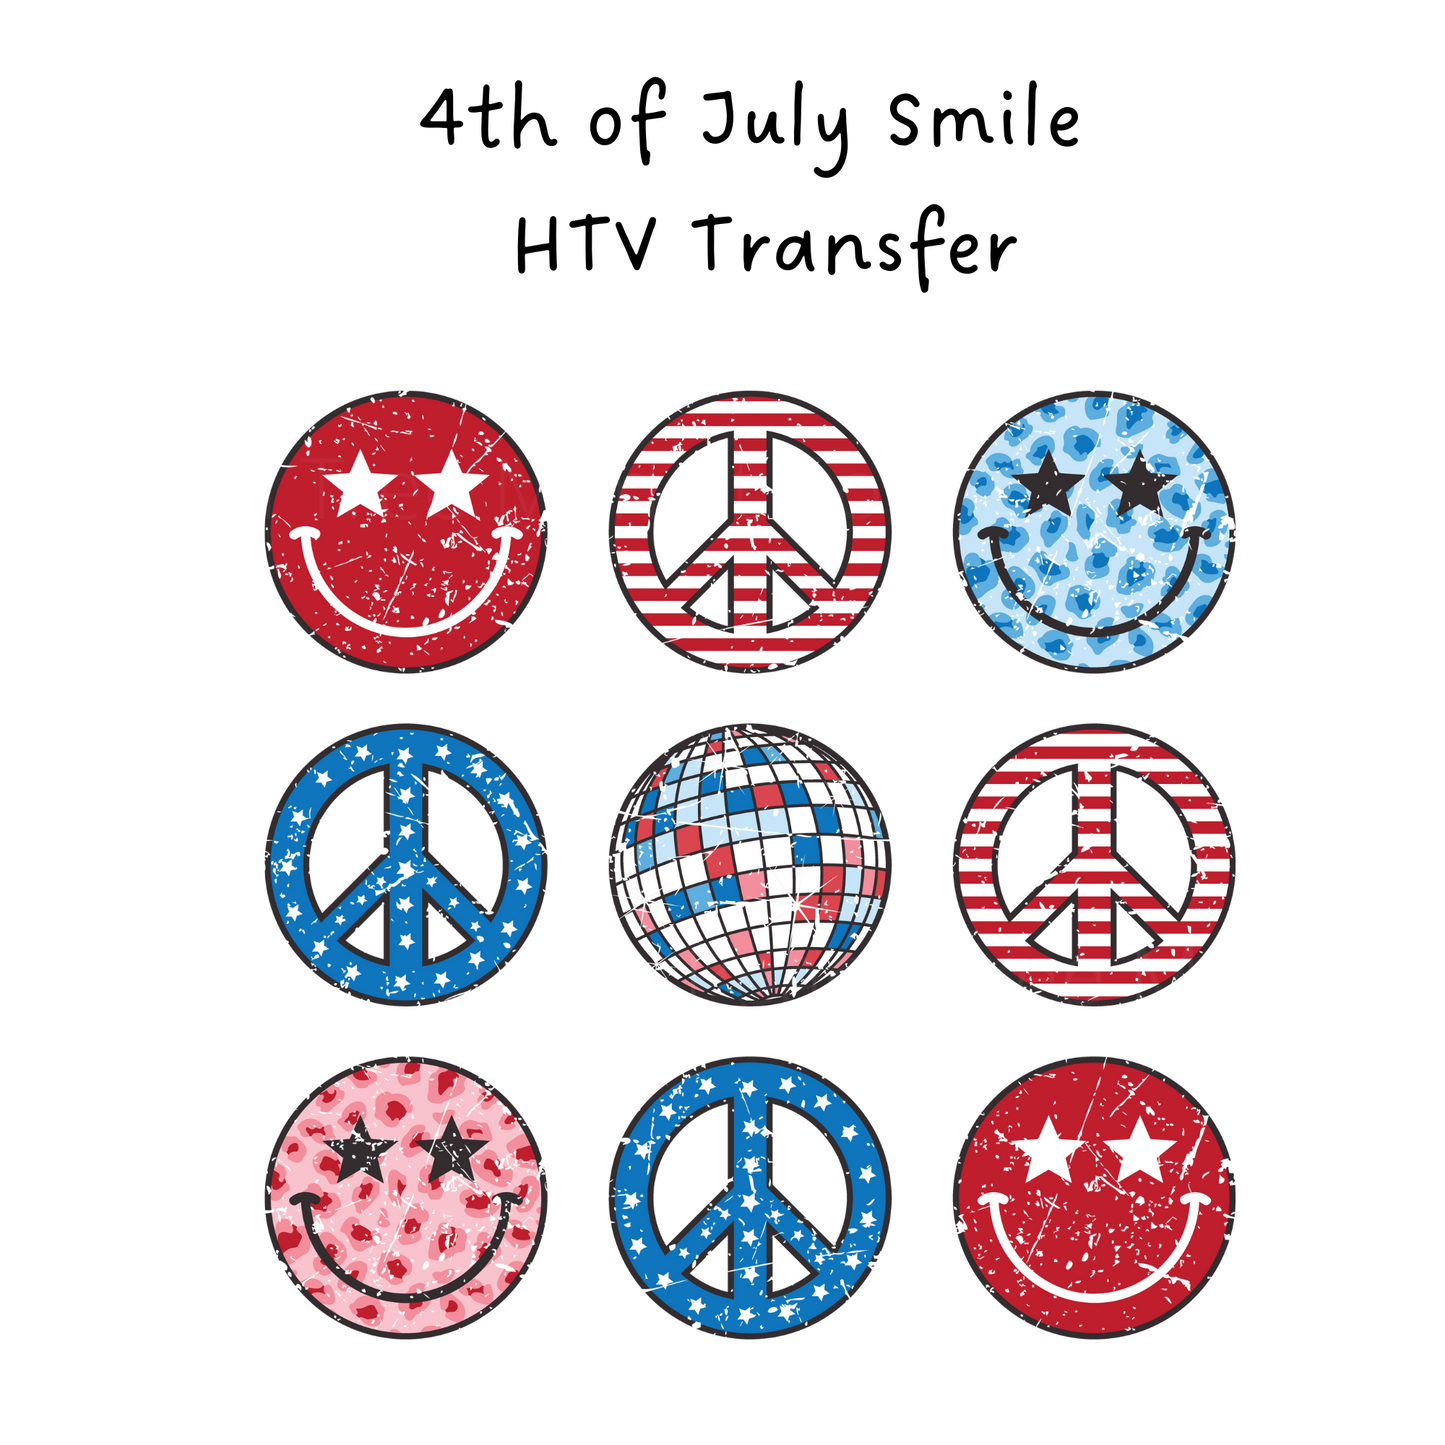 4th Of July Smile HTV Transfer